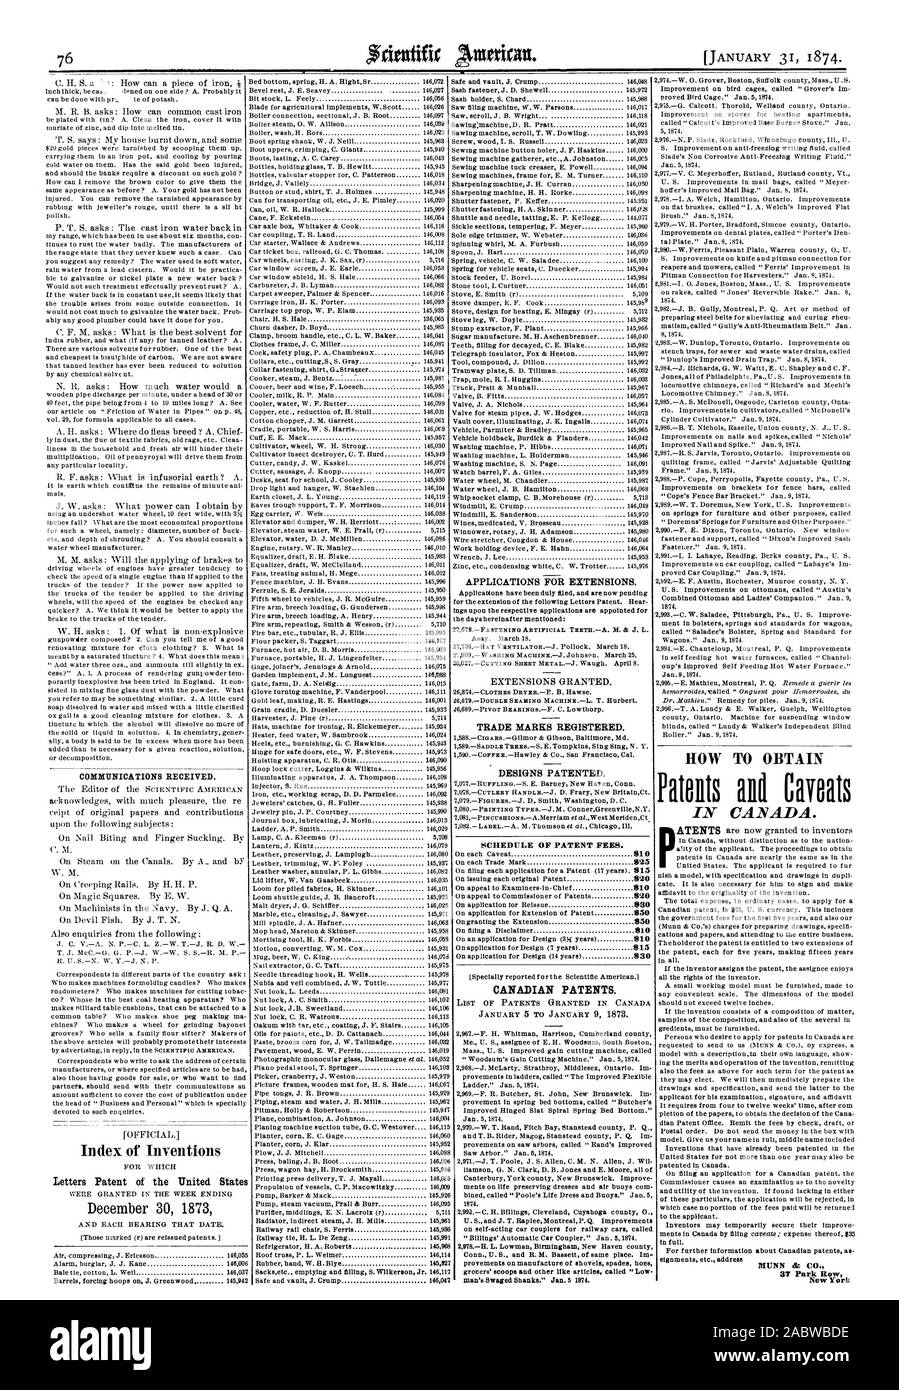 Index of Inventions Letters Patent of the United States December 30 1873 APPLICATIONS FOR EXTENSIONS. the days hereinafter mentioned: TRADE MARKS REGISTERED. DESIGNS PATENTED. SCHEDULE OF PATENT FEES. 810 820 830 850 850 810 810 815 830 (Specially reported for the Scientific American.1 CANADIAN PATENTS. LIST OF PATENTS GRANTED IN CANADA 1874. 2978.-H. L. Lowman Birmingham New Haven county Conn. U. S. and R M. Bassett of same place. Im provements on manufacture of shovels spades hoes HOW TO OBTAIN ala signm ont etc. address MUNN at CO. 31' Park Row New York Safe and vault J. Crump Sash fastener Stock Photo